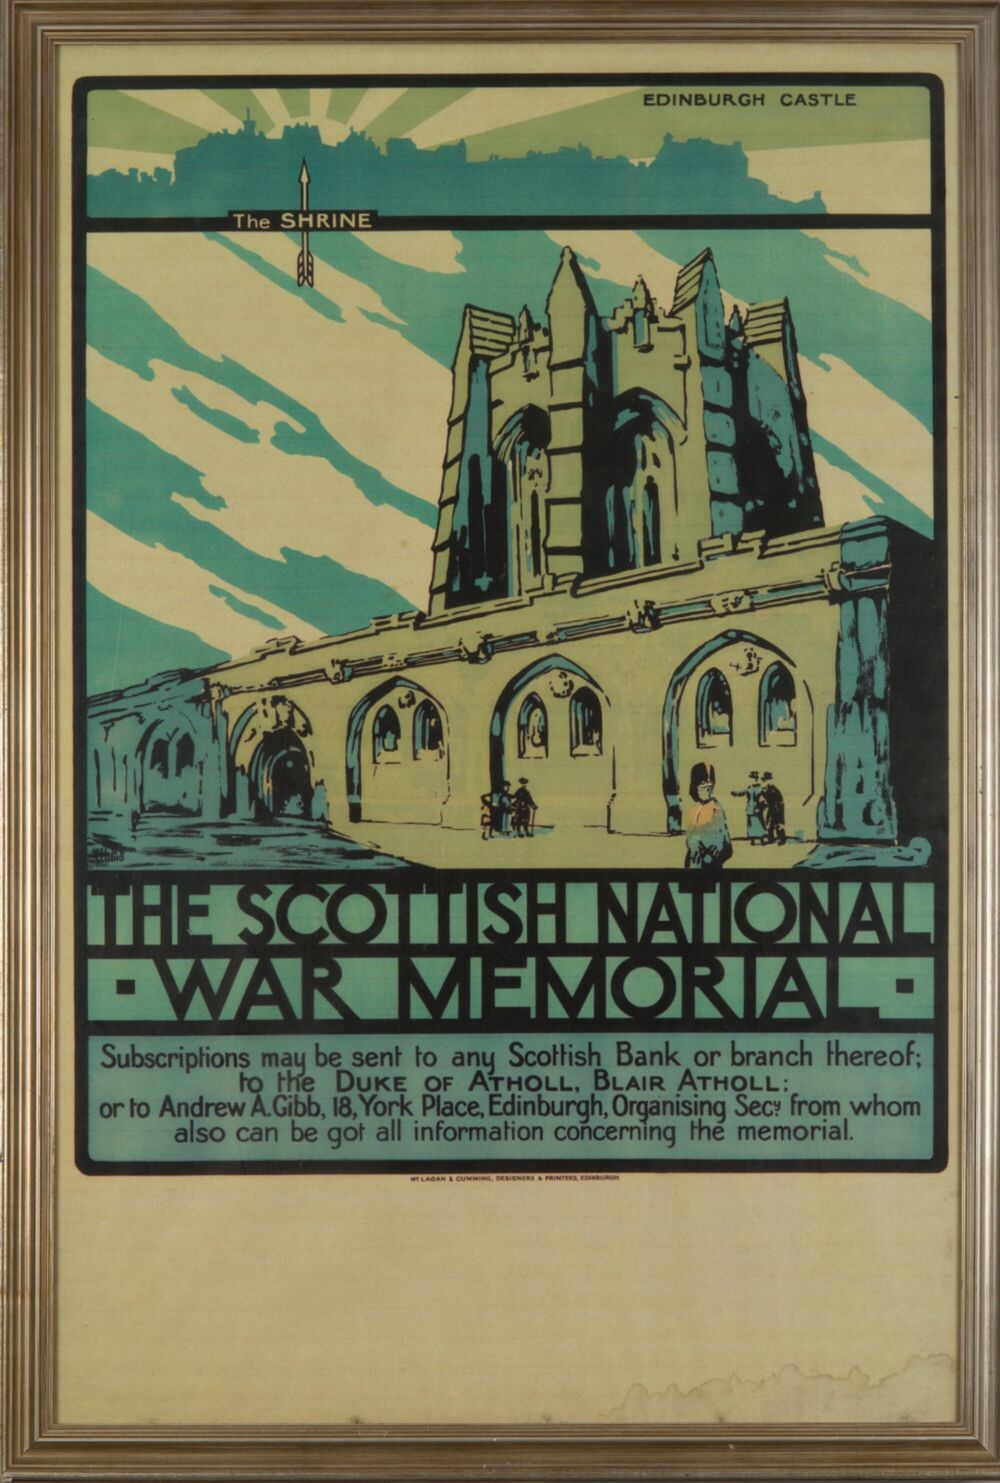 A poster designed to raise funding for the Scottish National War Memorial during the First World War depicts a prospecting image of the war memorial after construction. A tall circular building - like a castle tower - stands behind a long, low-lying building. The sky is painted with sweeping white and blue streaks while a stream of light hits the length of the buildings.